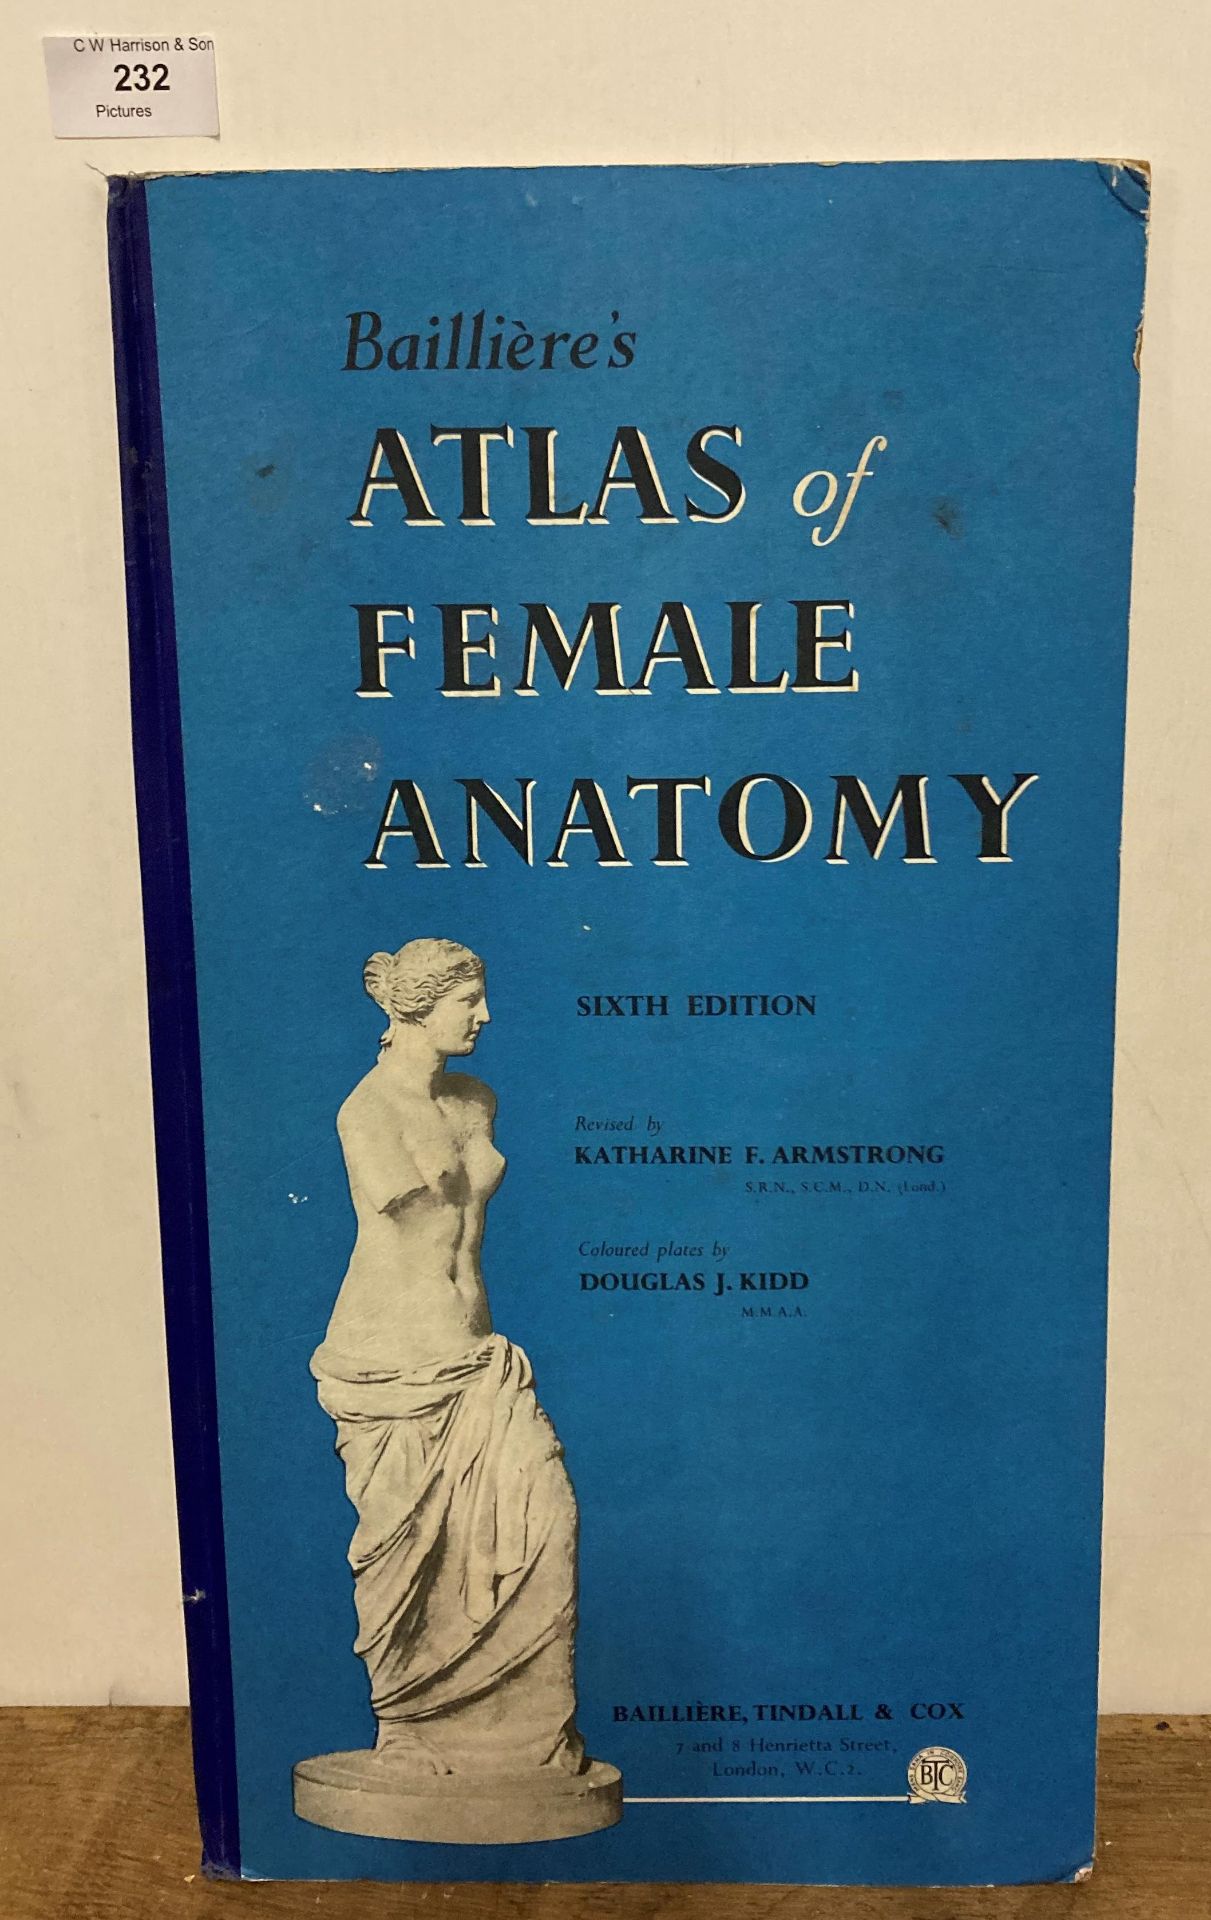 Baillieres 'Atlas of Female Anatomy' Sixth Edition revised by Katharine F Armstrong,